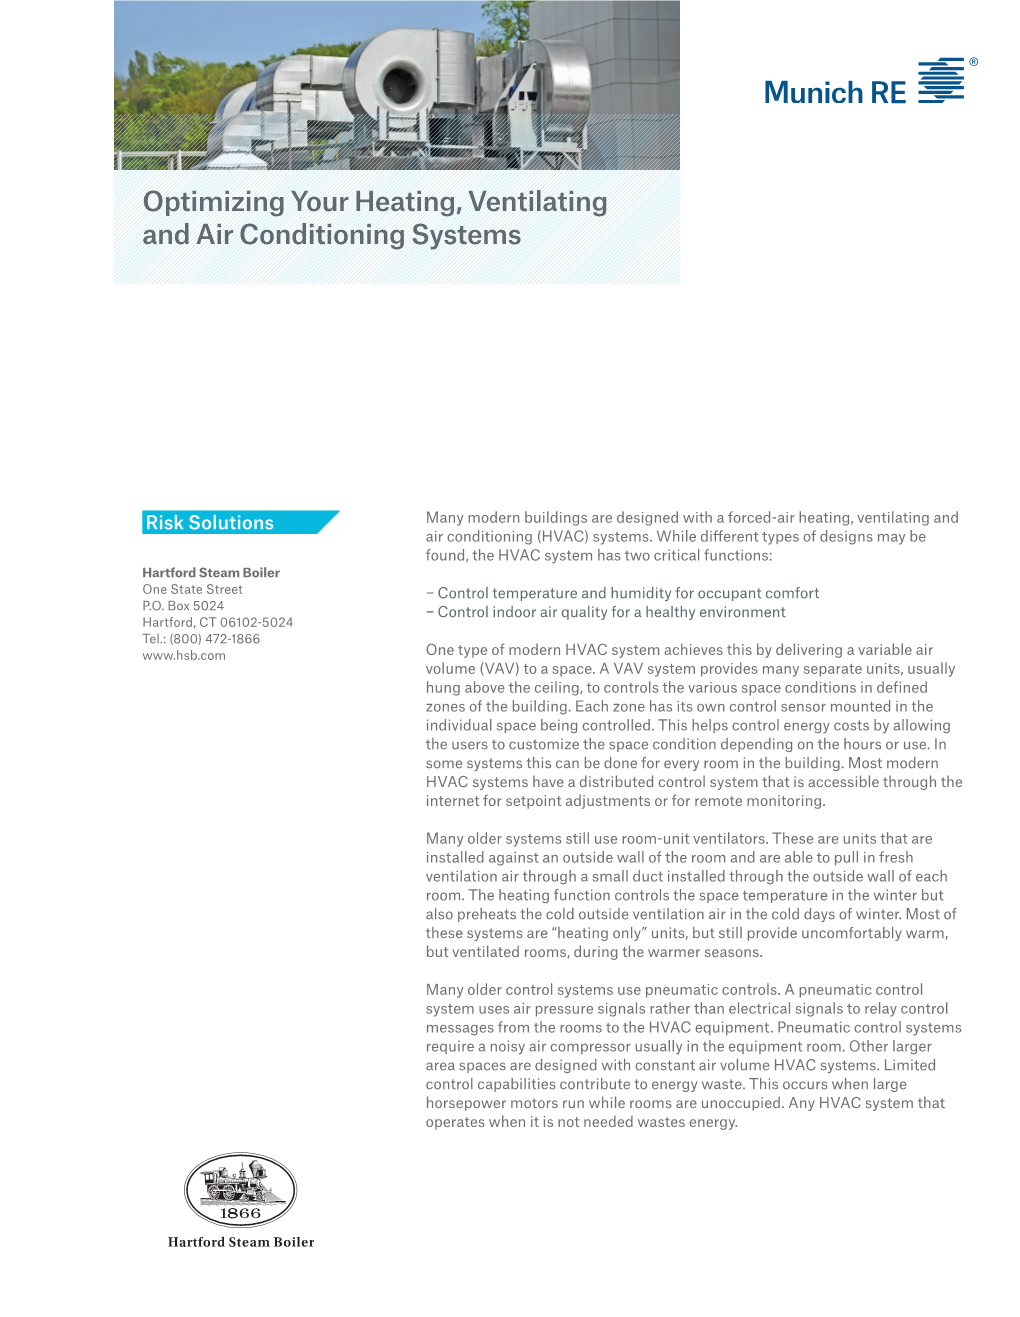 Optimizing Your Heating, Ventilating and Air Conditioning Systems